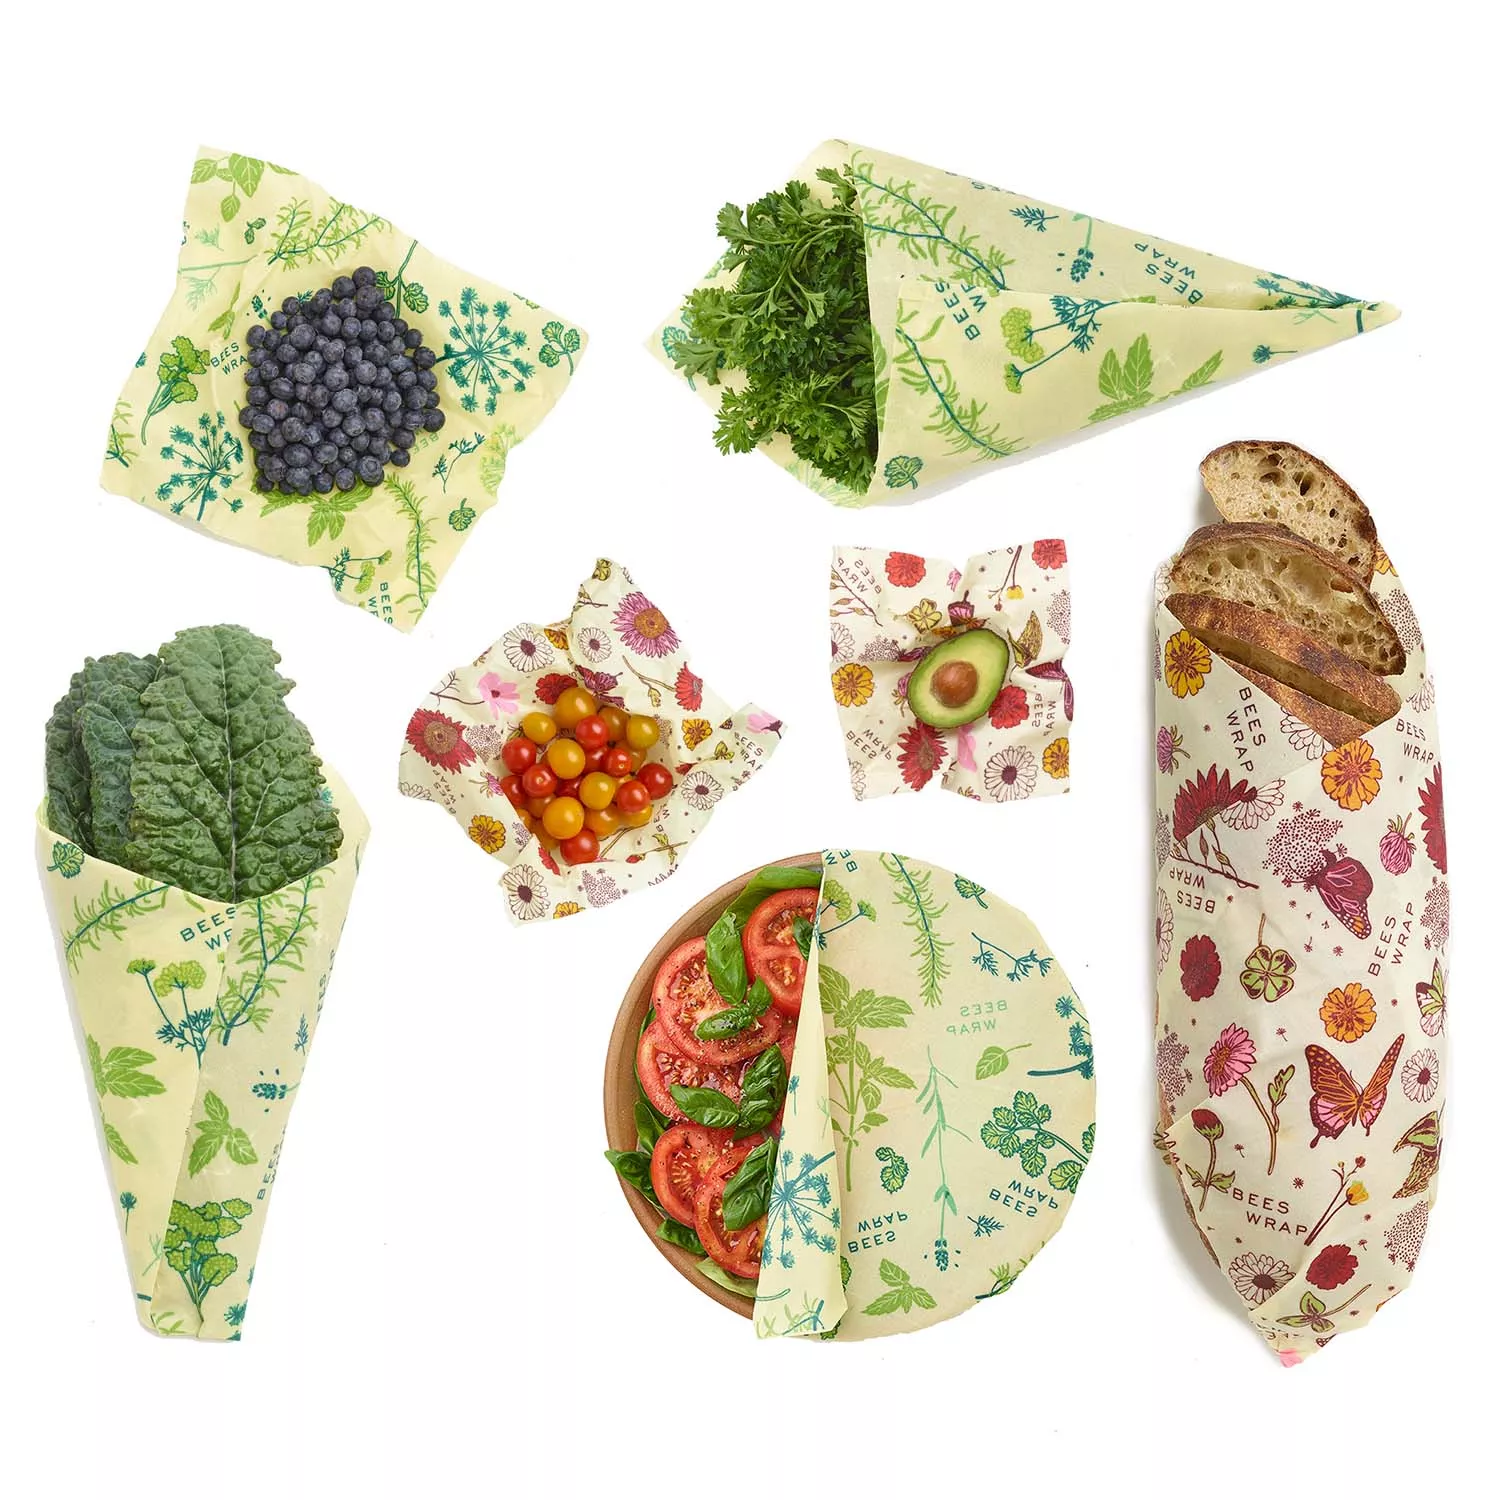 Bakers Bundle Reusable Food Wraps by Bee's Wrap